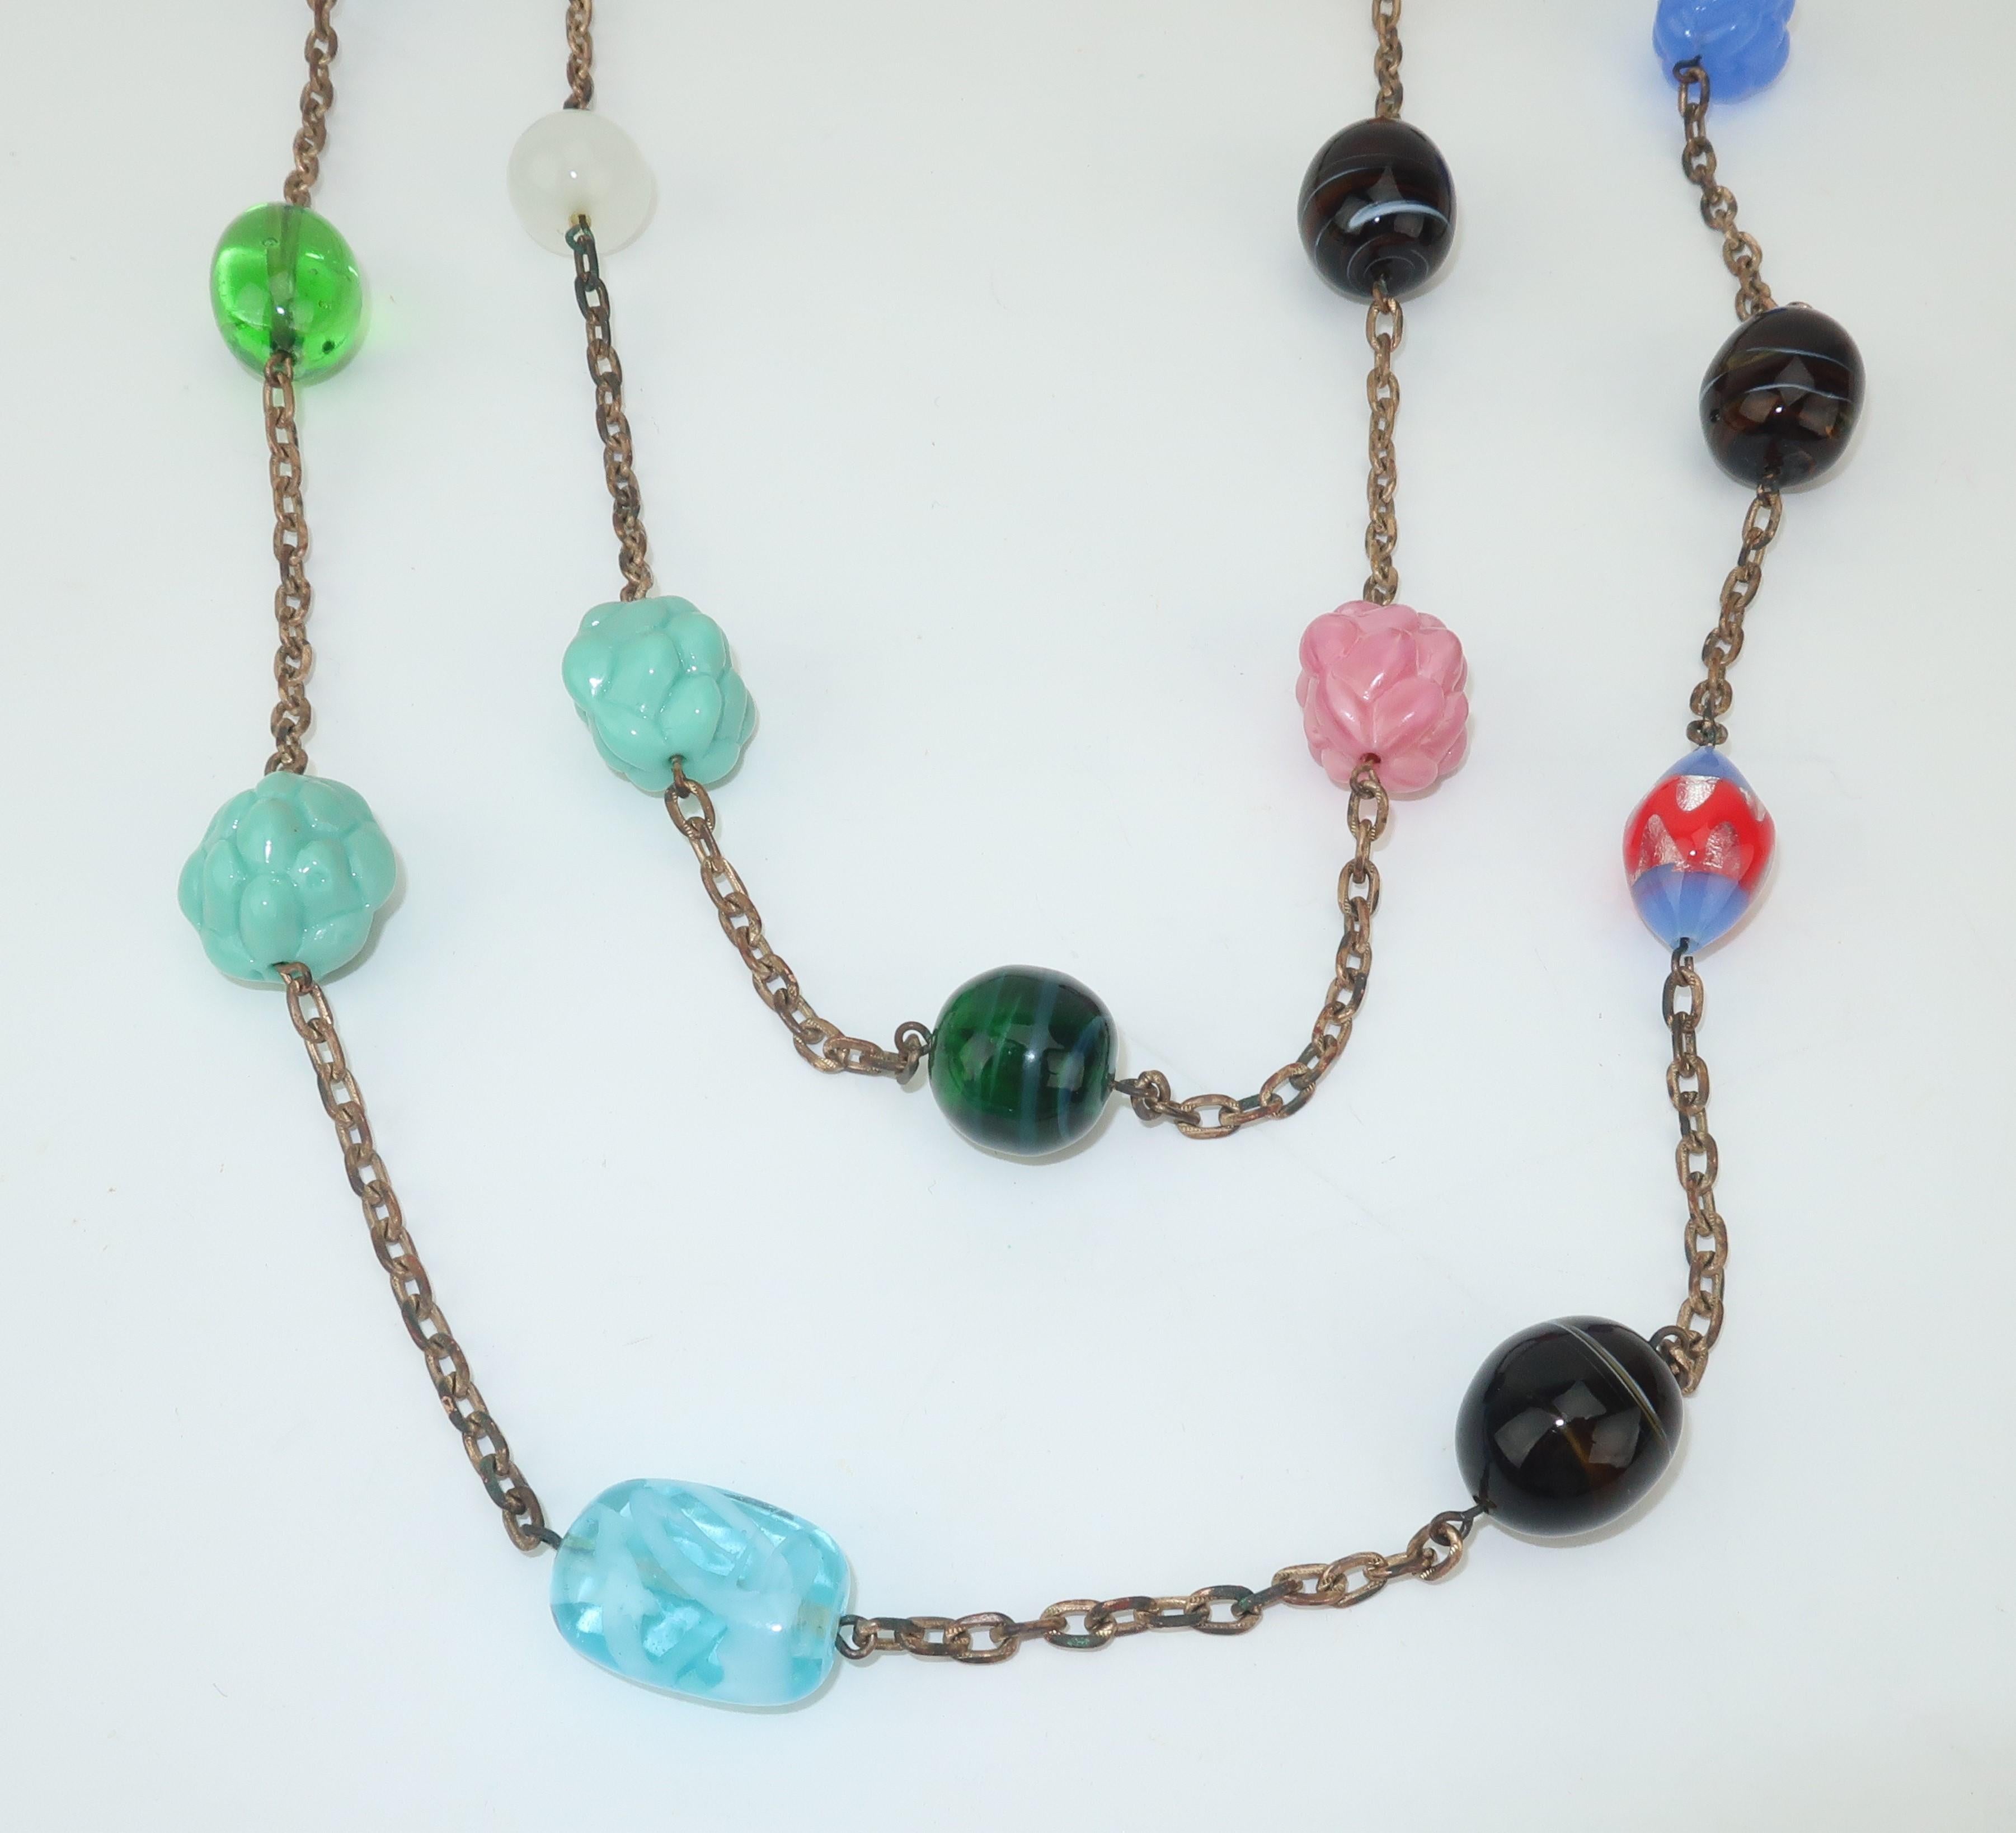 Add a touch of boho chic to your wardrobe with this C.1960 opera length chain necklace accented with art glass beads of different shapes and colors.  Measuring an amazing 61